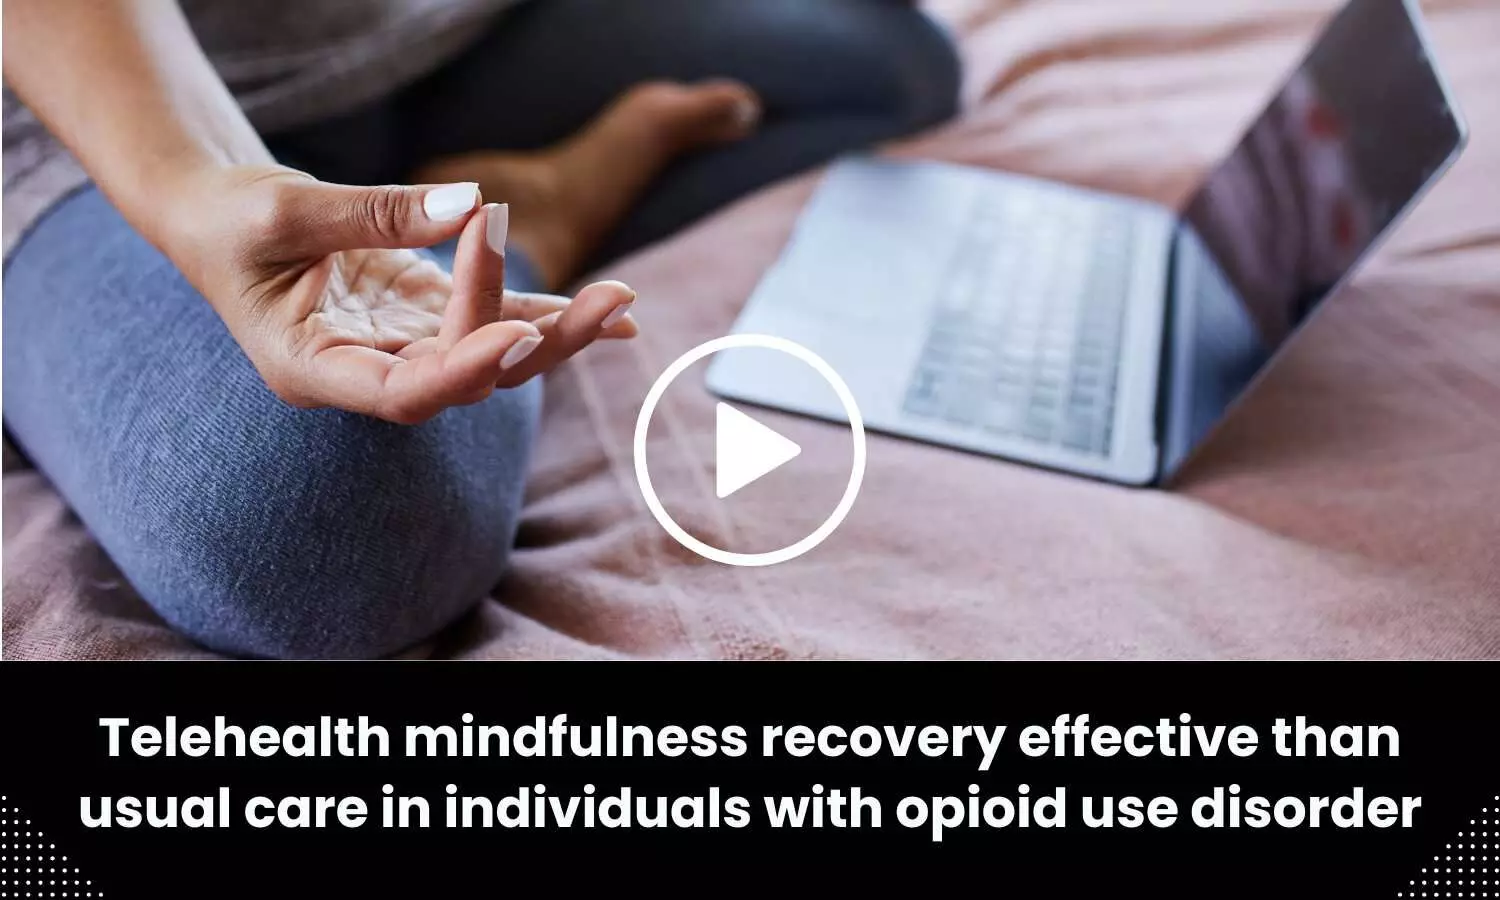 Telehealth mindfulness recovery effective than usual care in individuals with opioid use disorder